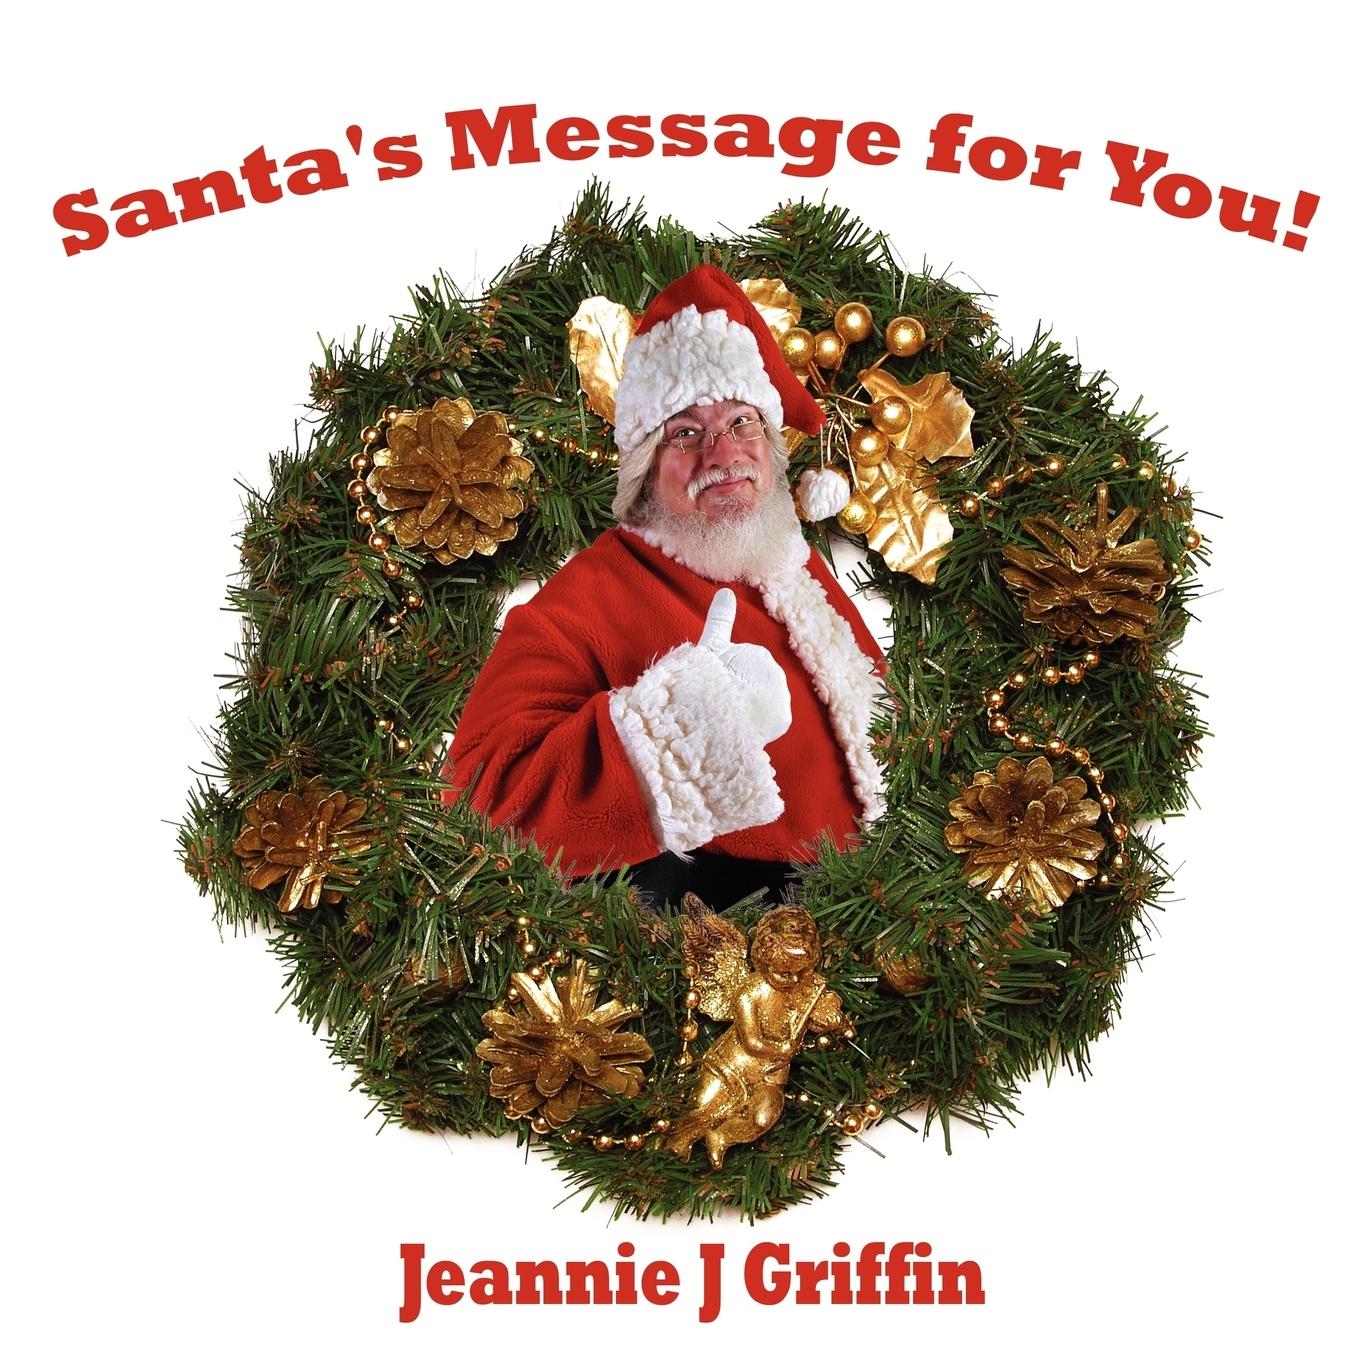 Santa s Message for You! - Griffin, Jeannie J